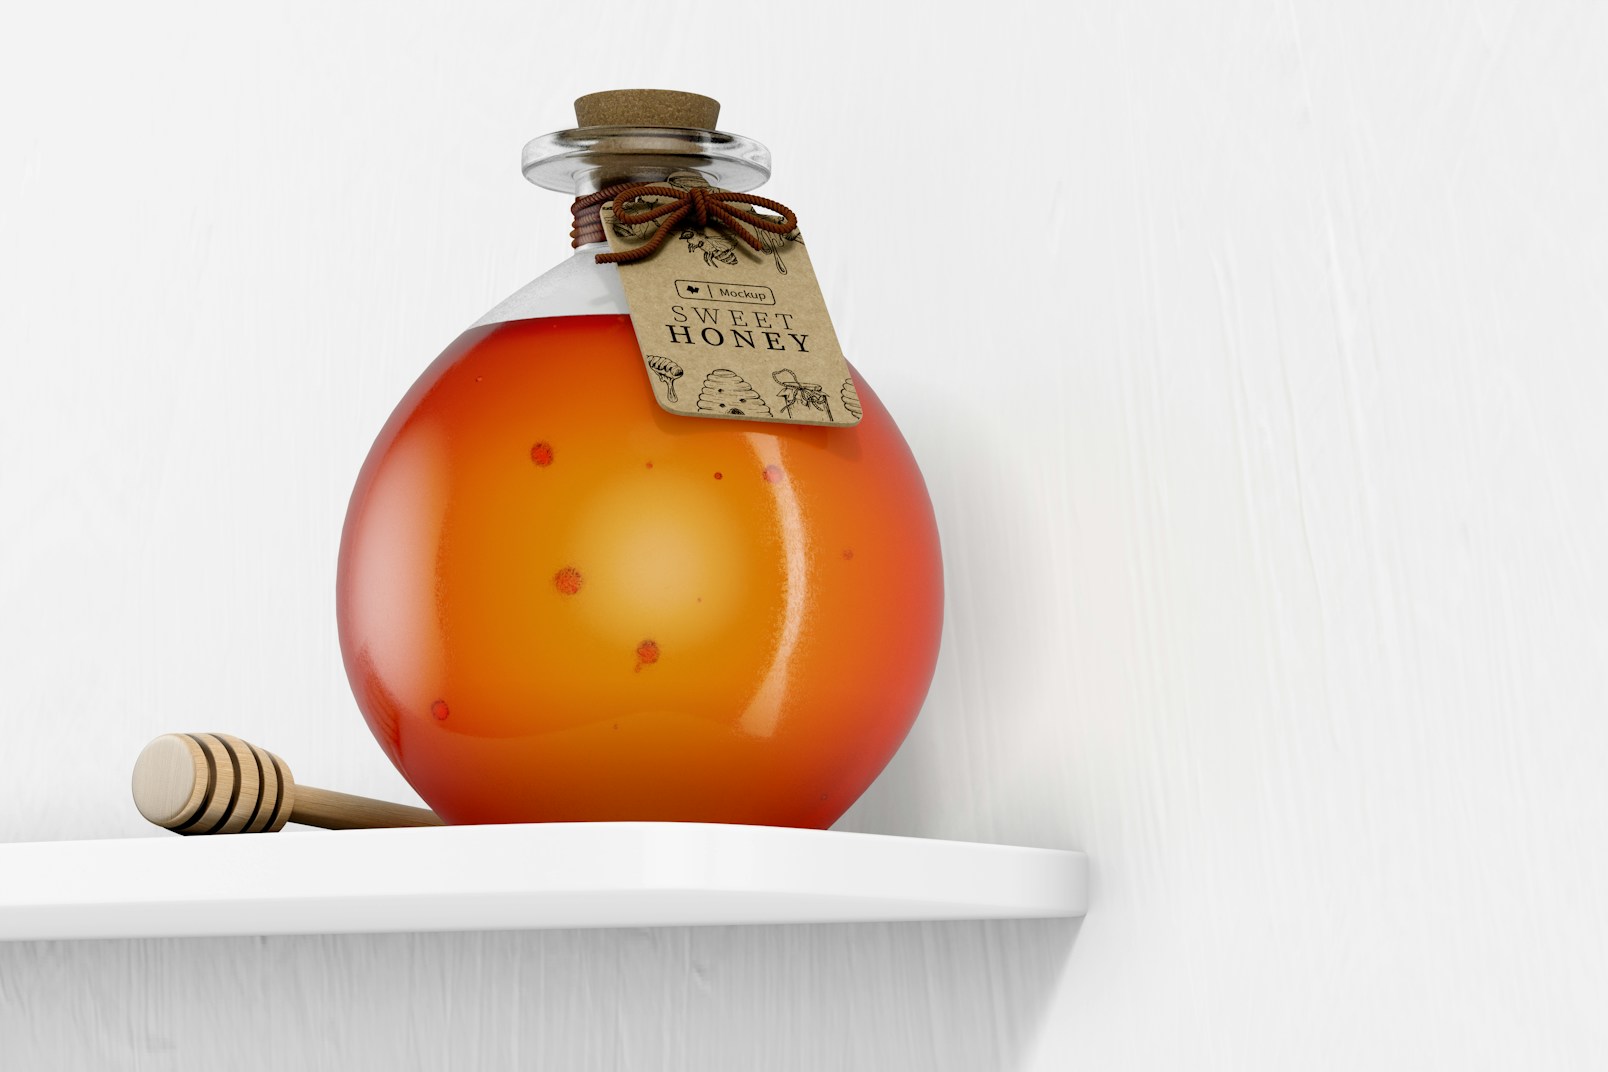 Round Honey Glass Bottle Mockup, Low Angle View